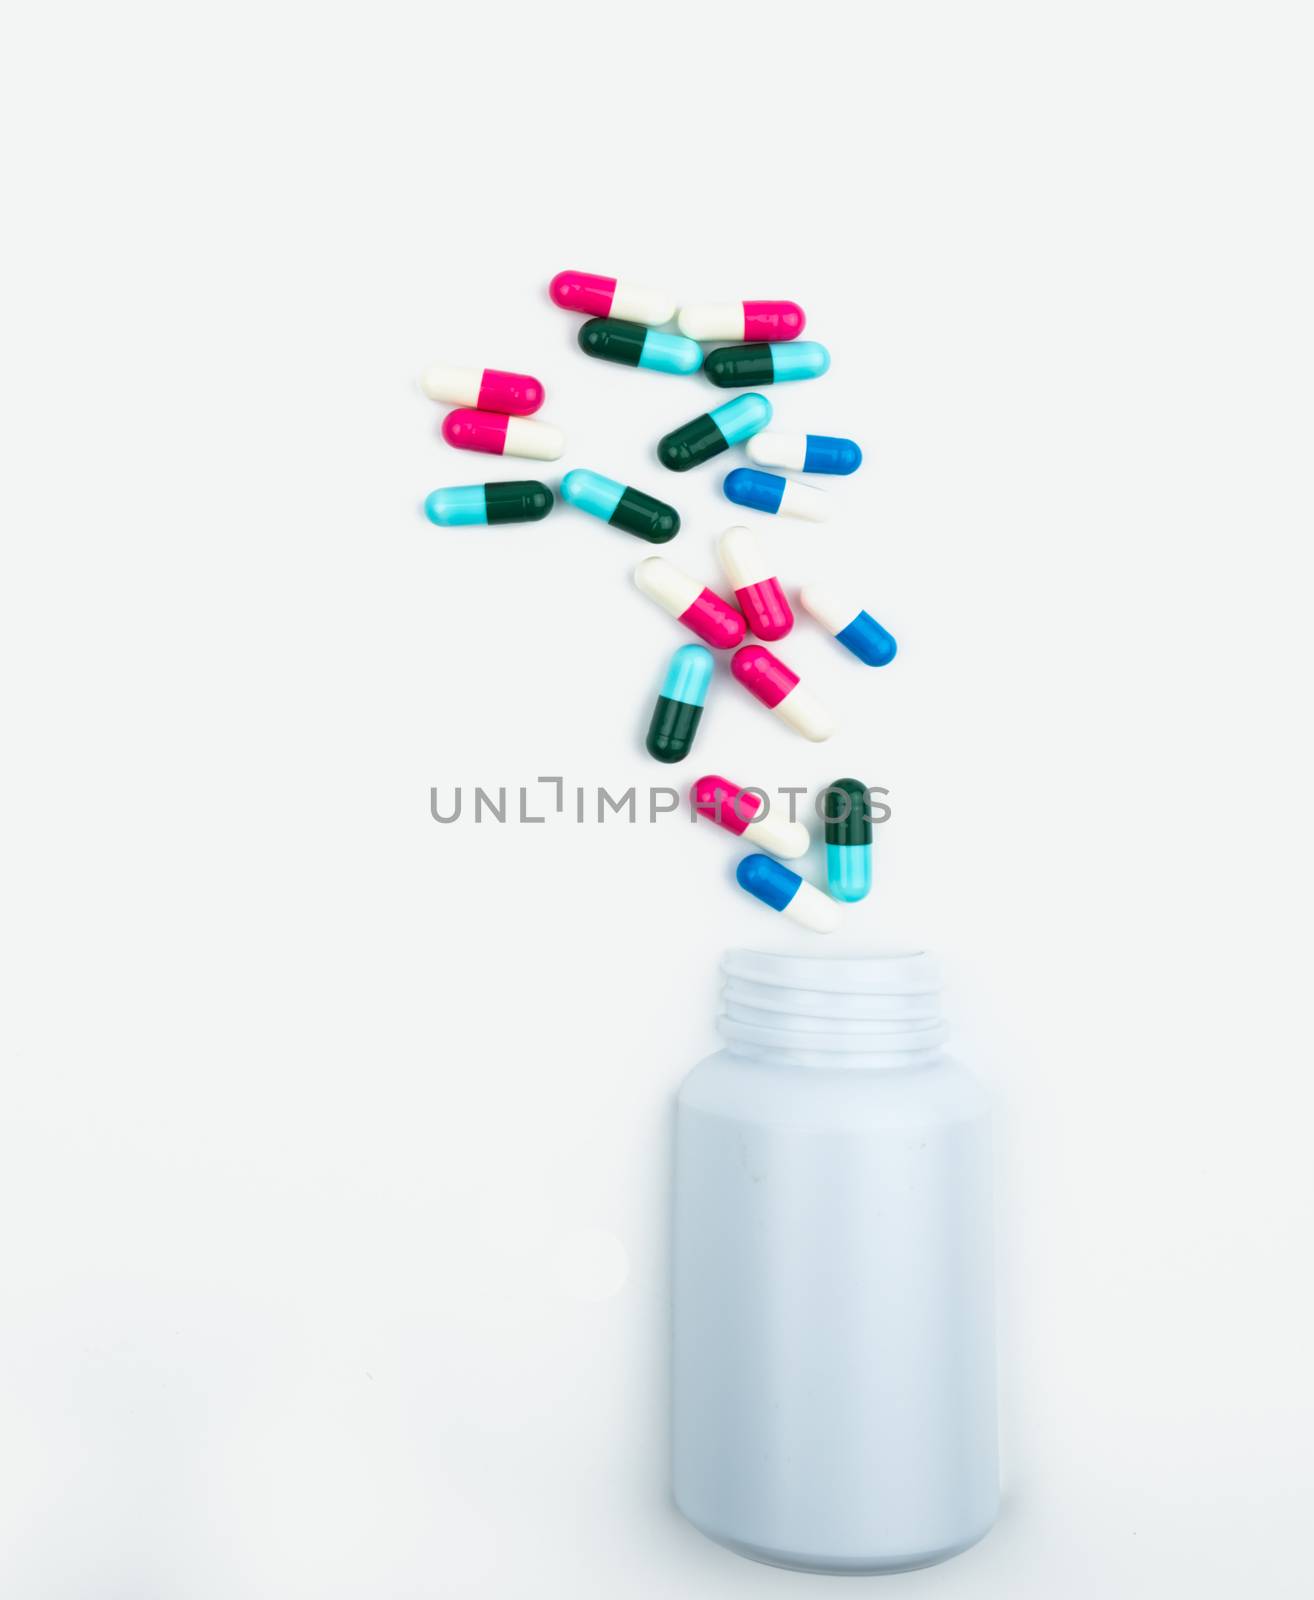 Pouring antibiotics capsule pills into plastic bottle isolated on white background with copy space. Drug storage, antibiotic drug use with reasonable, health policy and health insurance concept. Toxicology. Pharmaceutical industry. Pharmacy background.